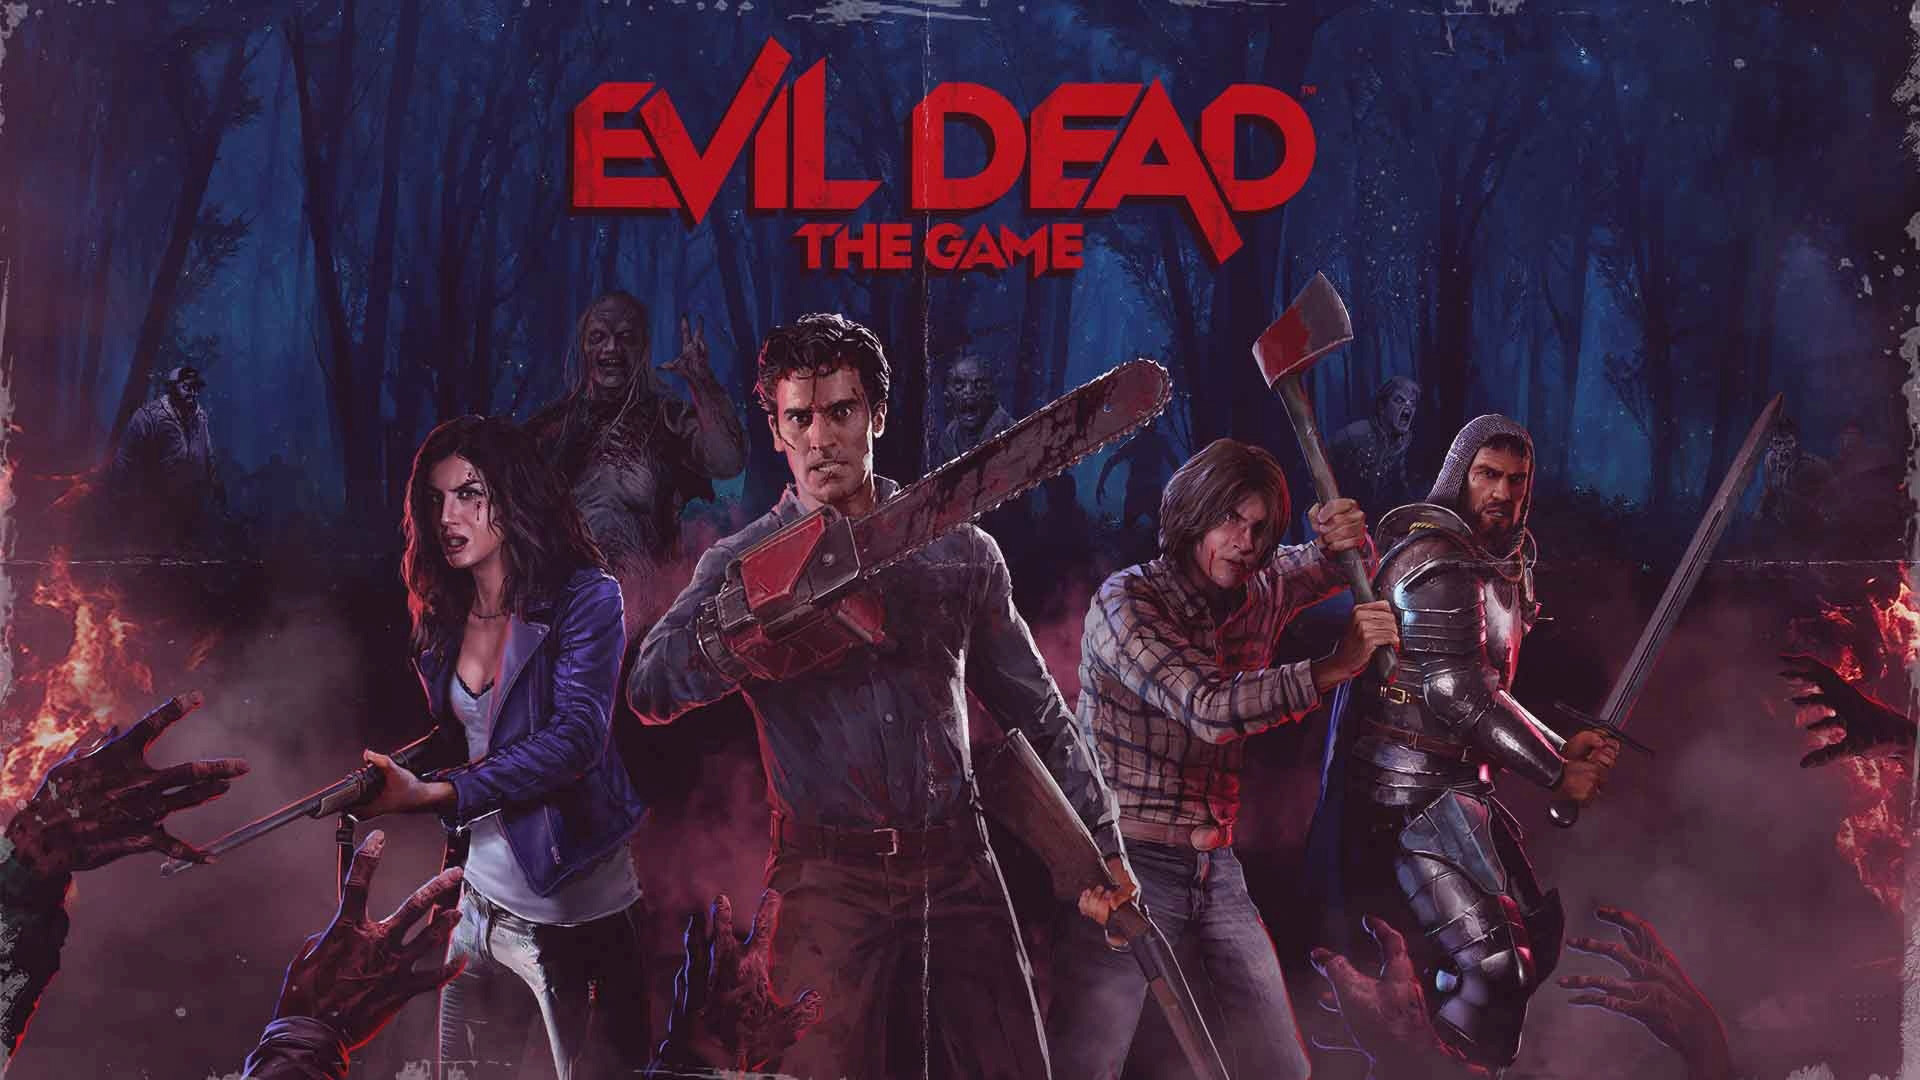 Evil Dead key art featuring four characters from the series